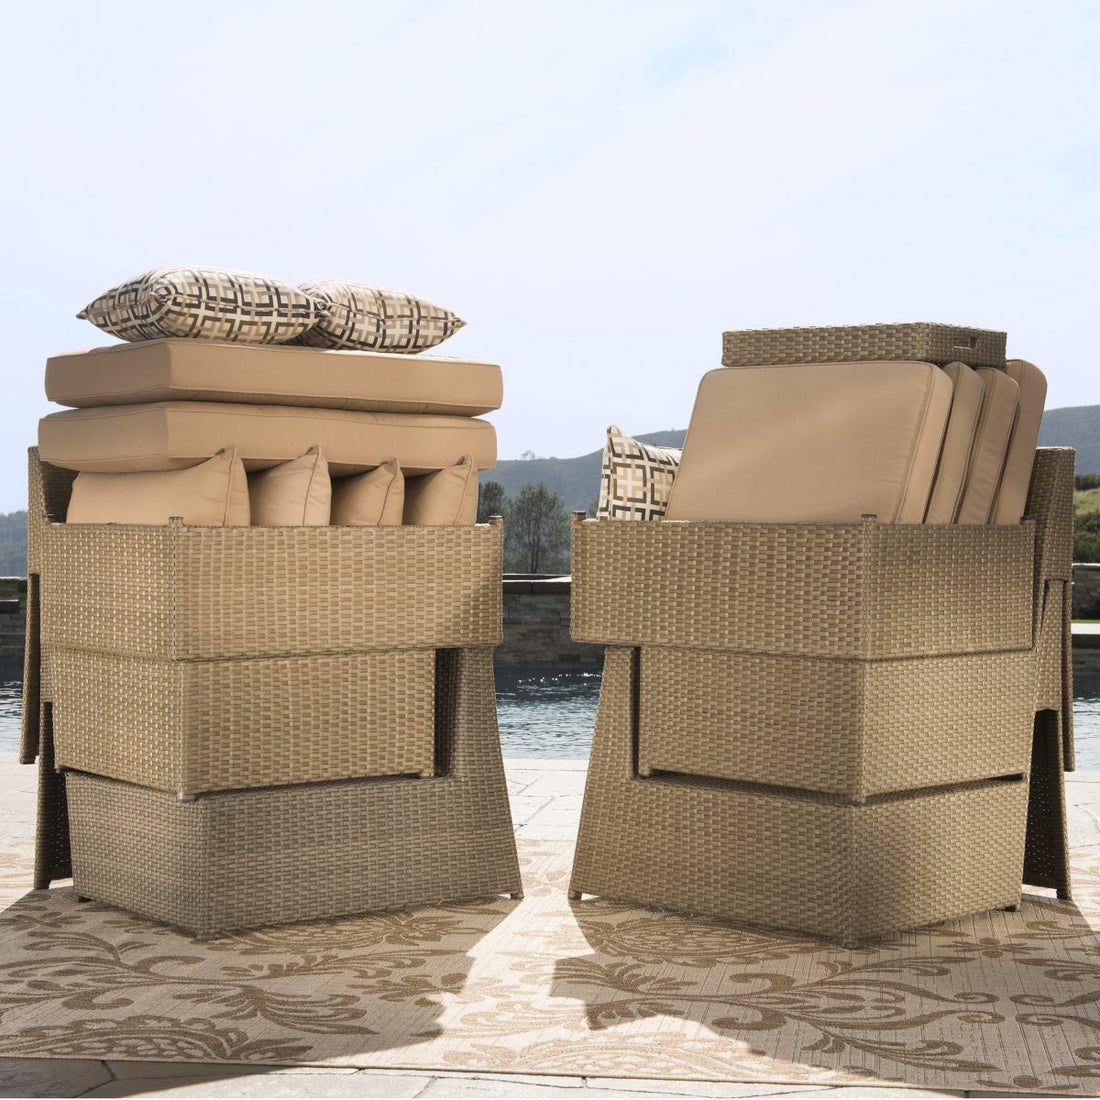 How to Store and Protect Your Outdoor Patio Furniture